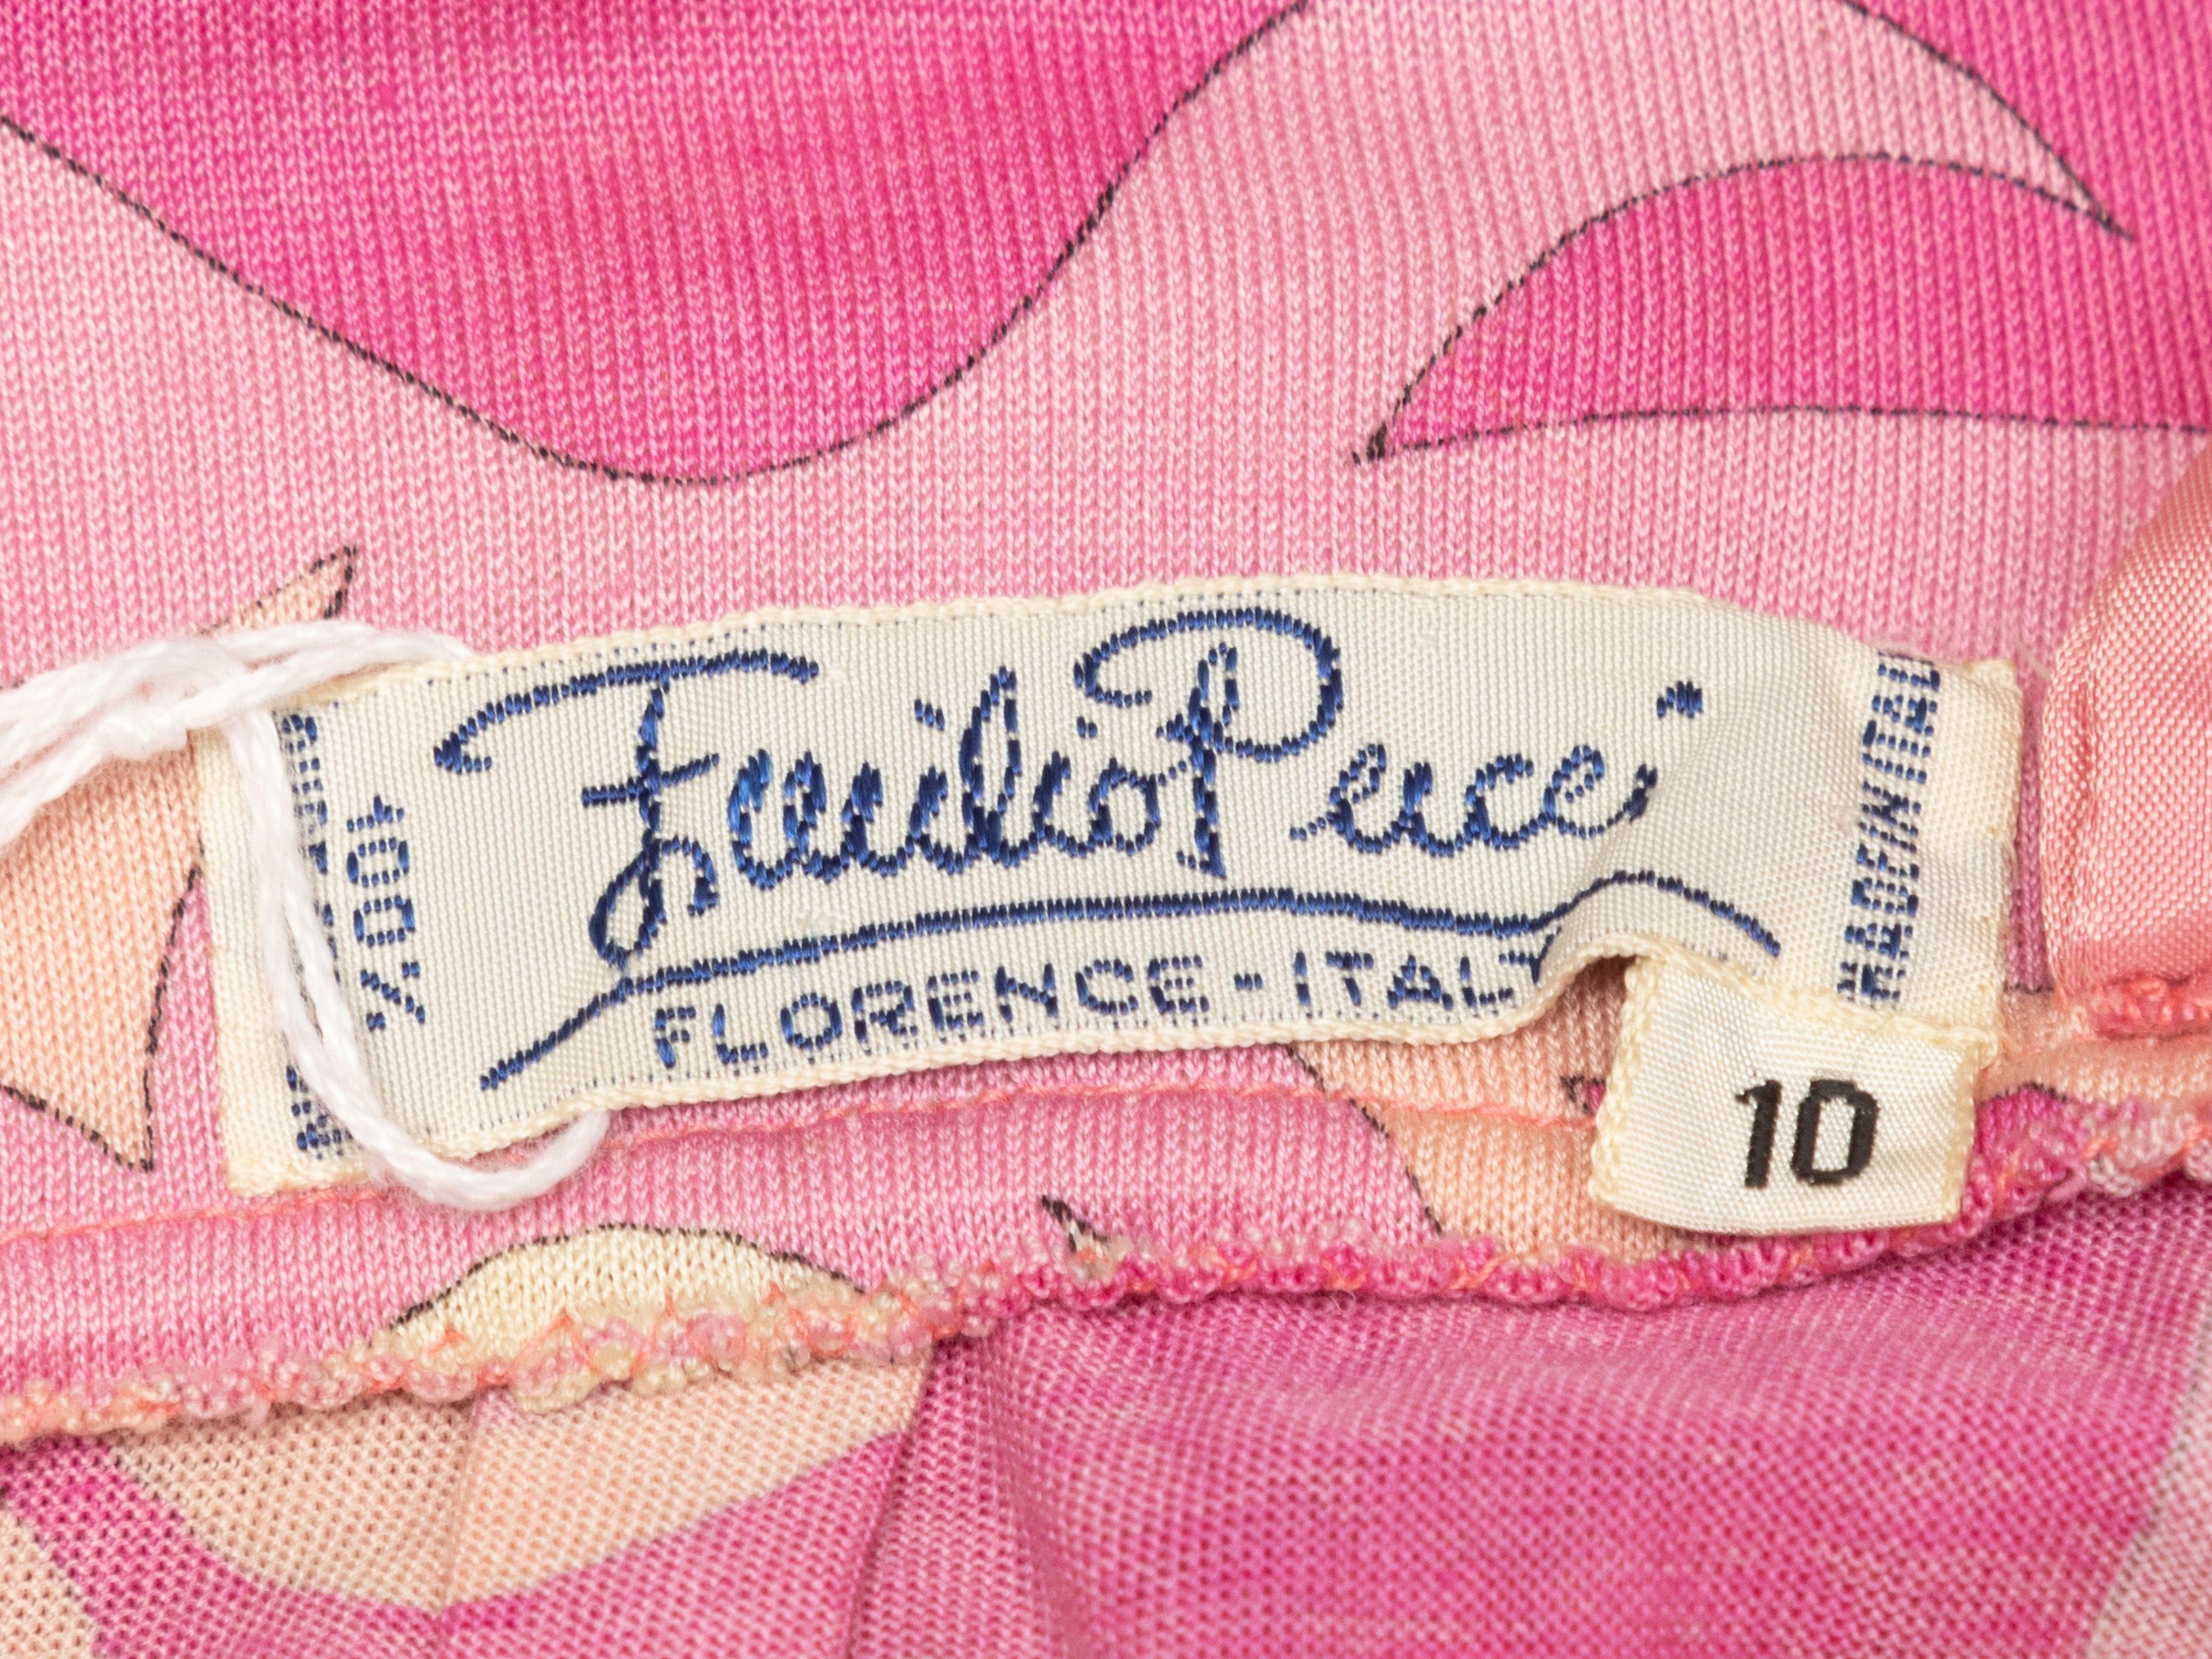 Product Details: Vintage pink and white abstraact print pleated skirt by Emilio Pucci. Circa 1960s. Side closure. Designer size 10. 28